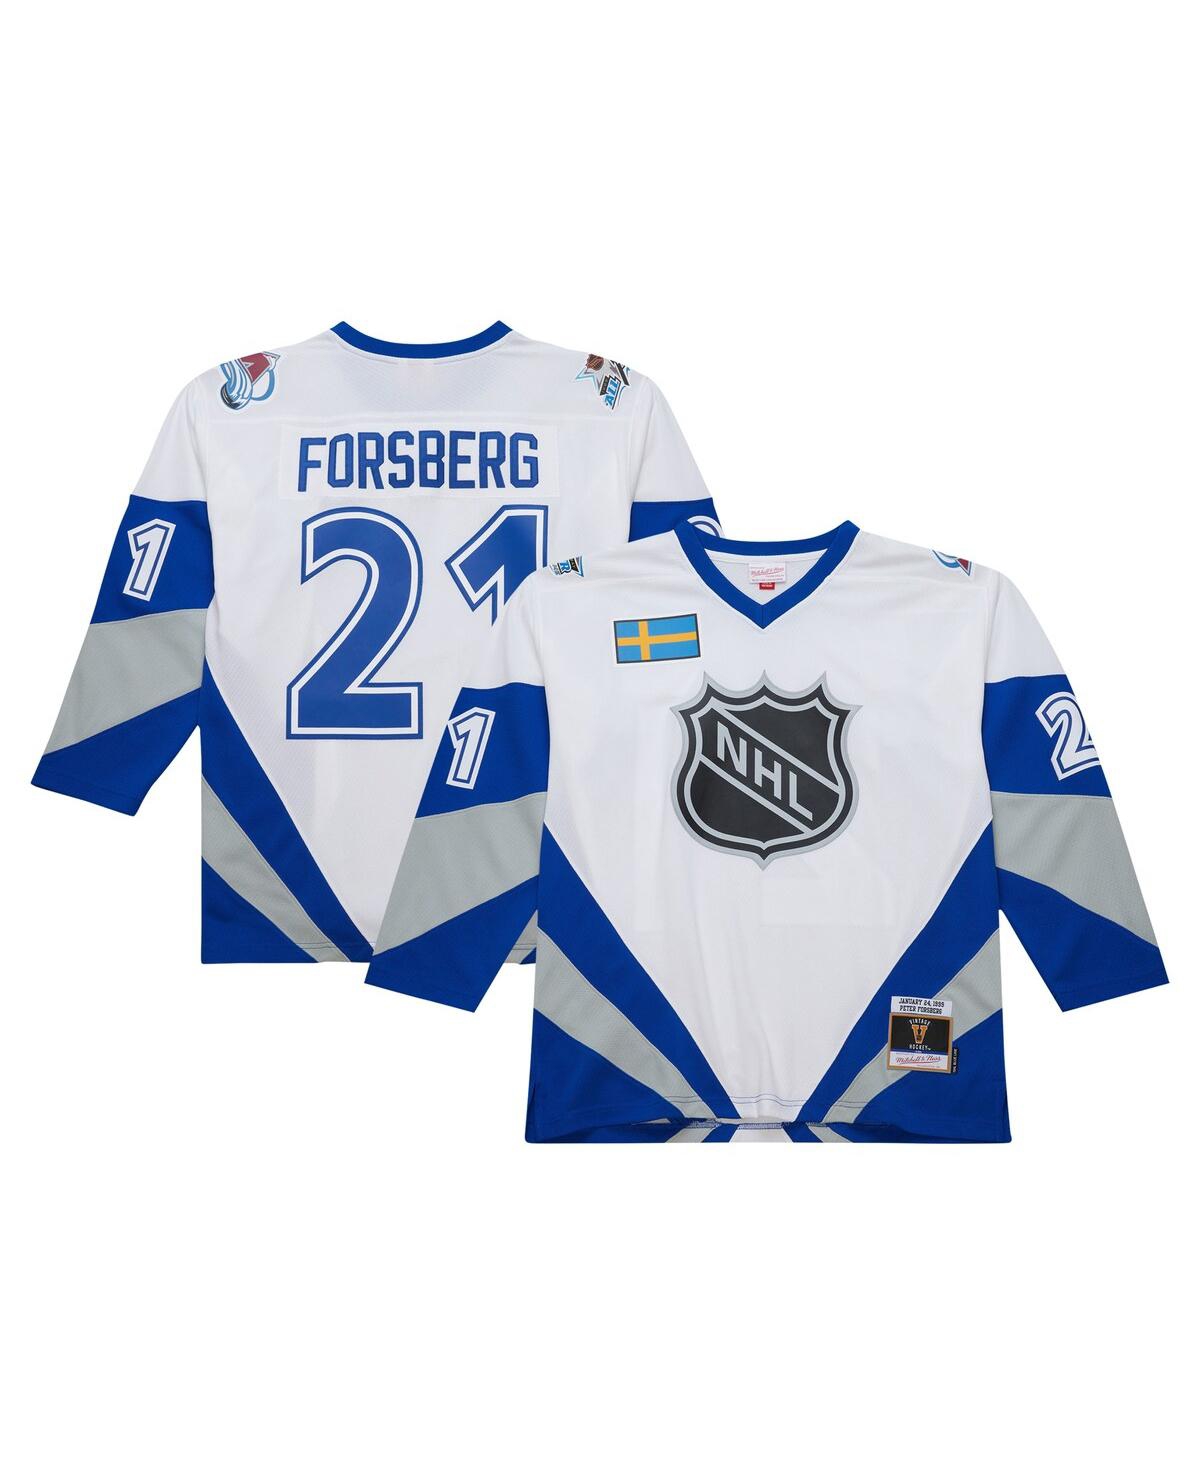 Mitchell Ness Men's Peter Forsberg White 1999 Nhl All-Star Game Blue Line Player Jersey - White